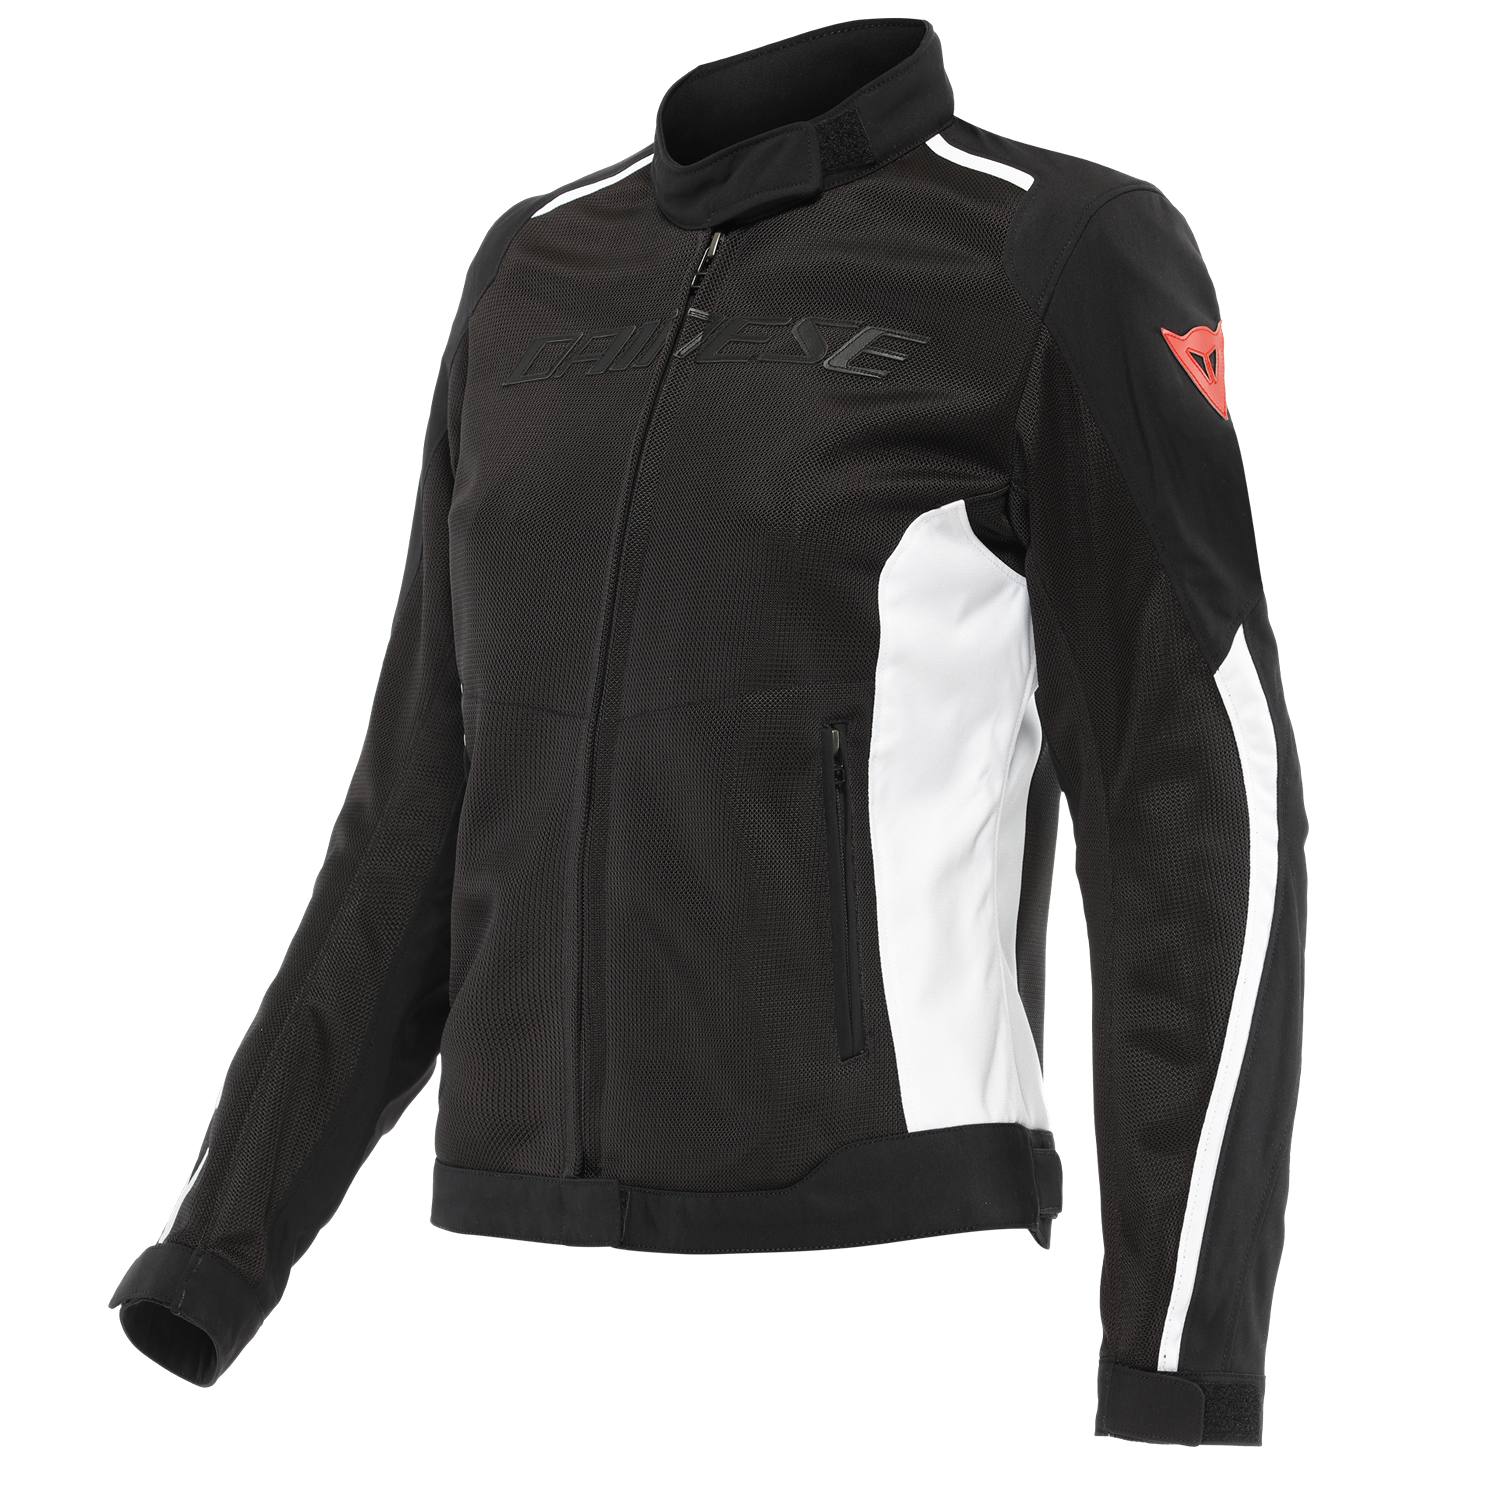 Image of Dainese Hydraflux 2 Air D-Dry Jacket Lady Black White Size 38 ID 8051019401724